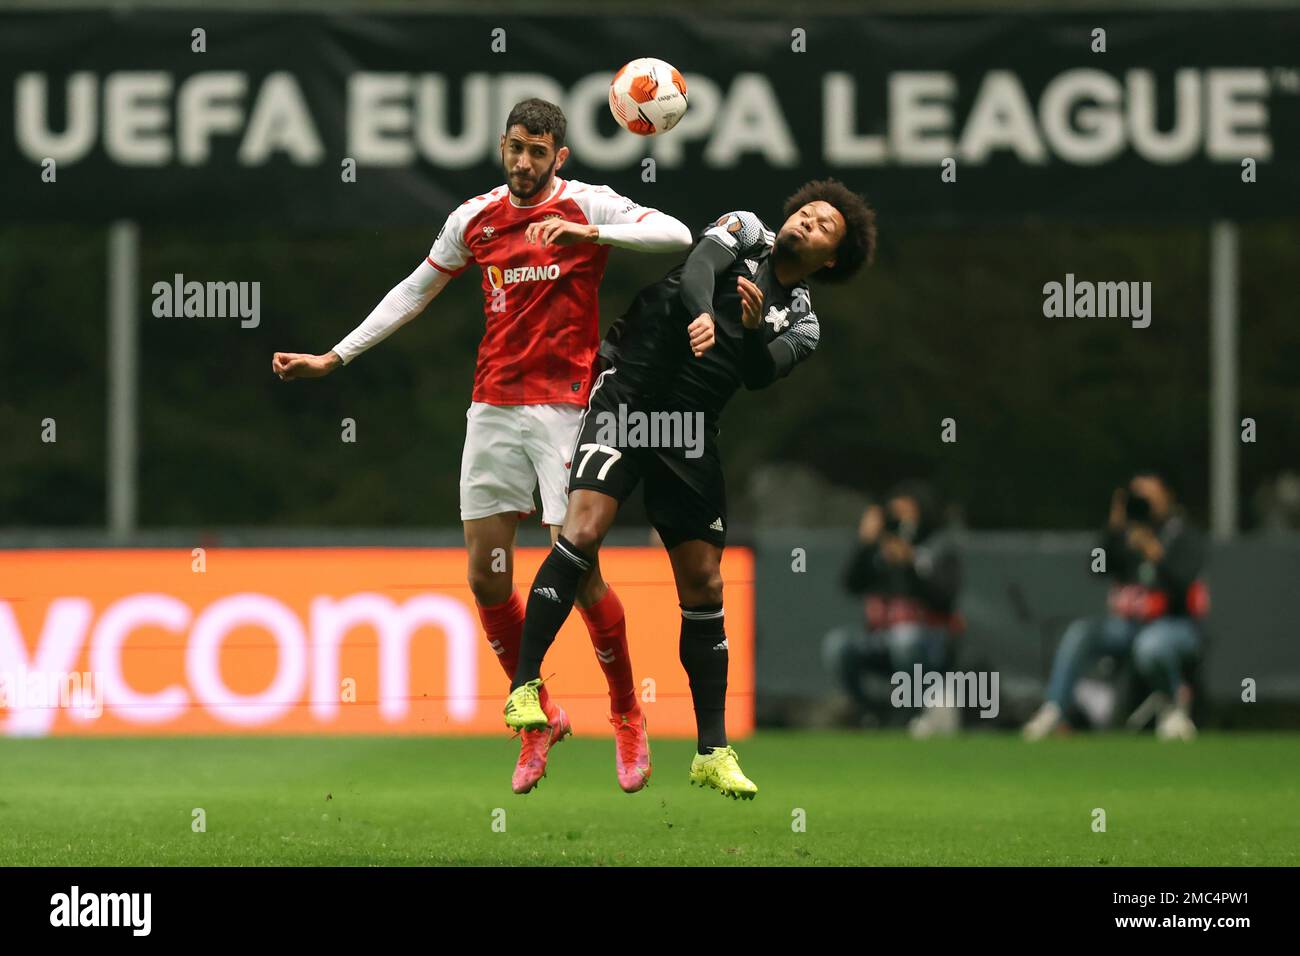 Bragas Vitor Tormena, left, and Sheriffs Bruno jump for the ball during the Europa League playoff, second leg, soccer match between SC Braga and Sheriff Tiraspol at the Municipal stadium in Braga,